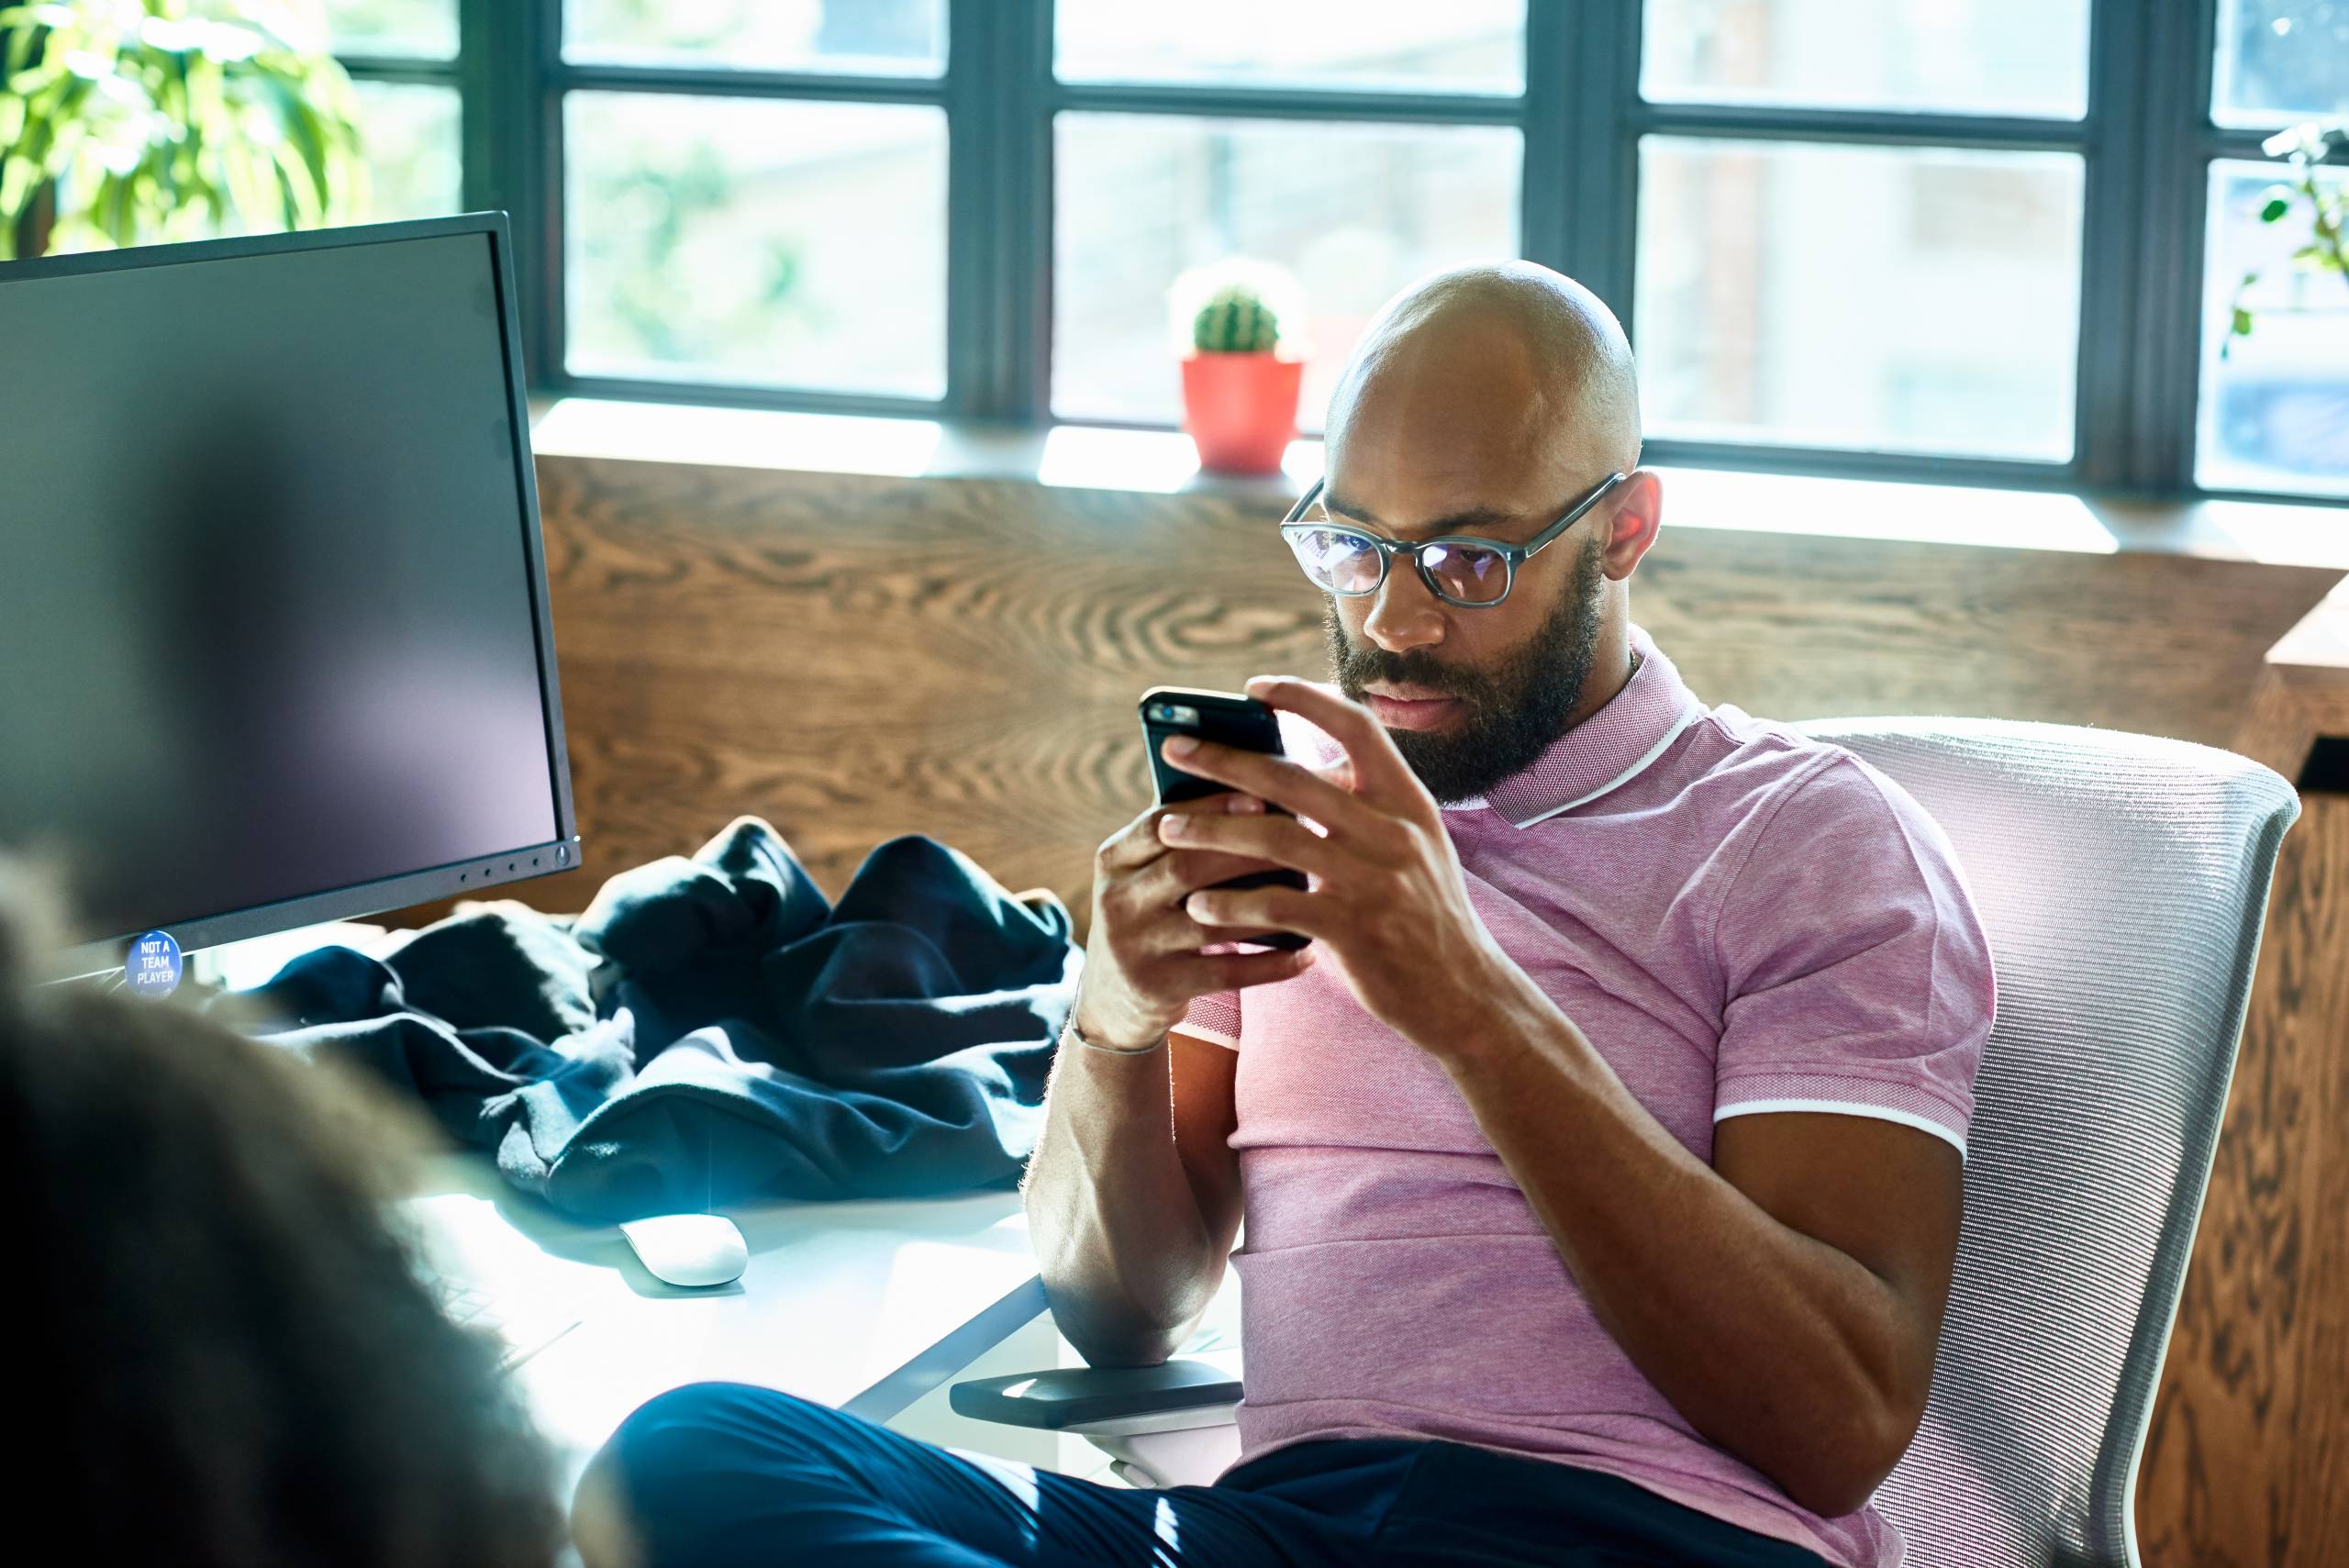 Man with beard and glasses looks at his phone screen while sitting next to a desk.